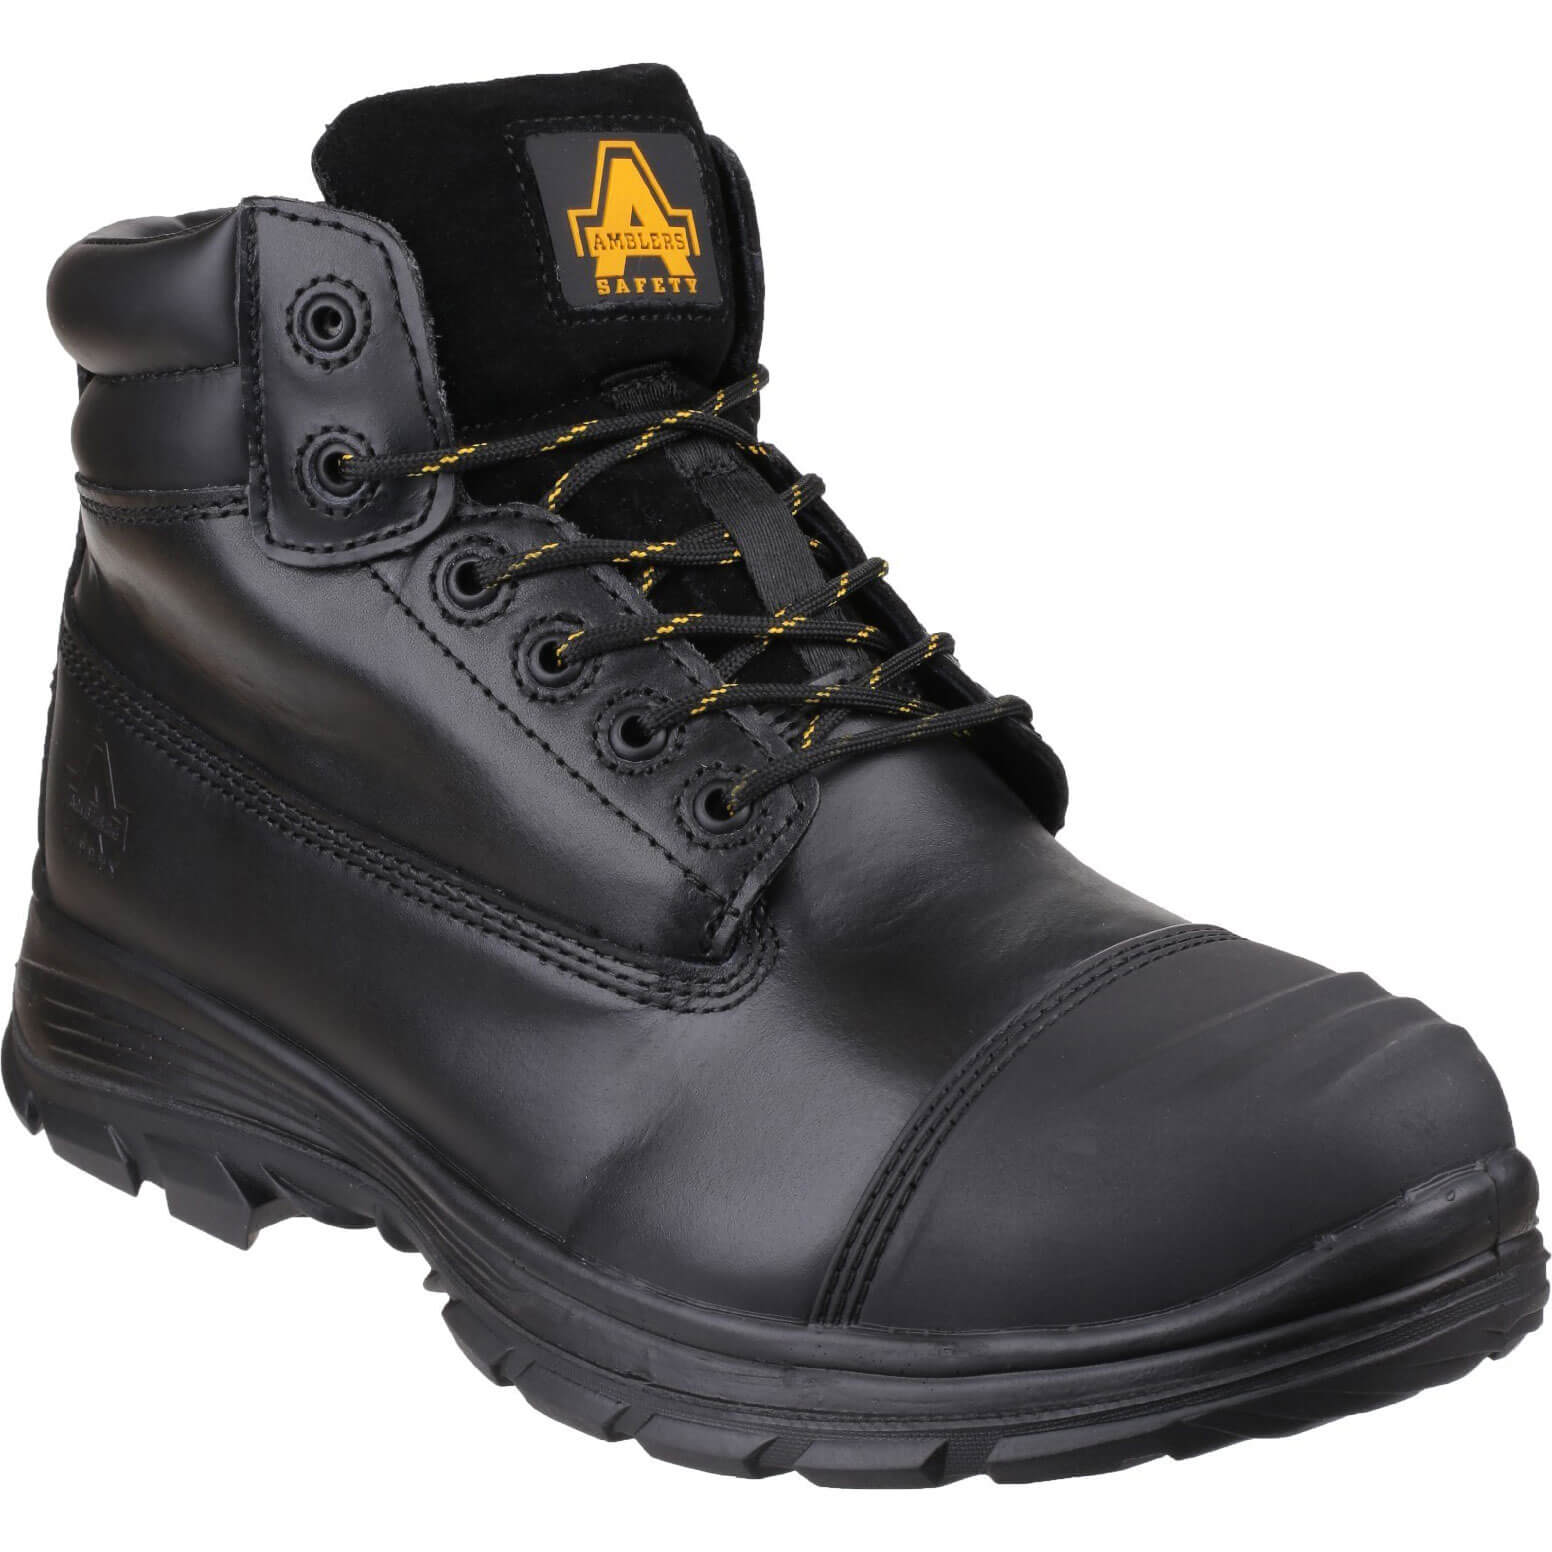 Image of Amblers Mens Safety FS301 Brecon Water Resistant Metatarsal Guard Safety Boots Black Size 10